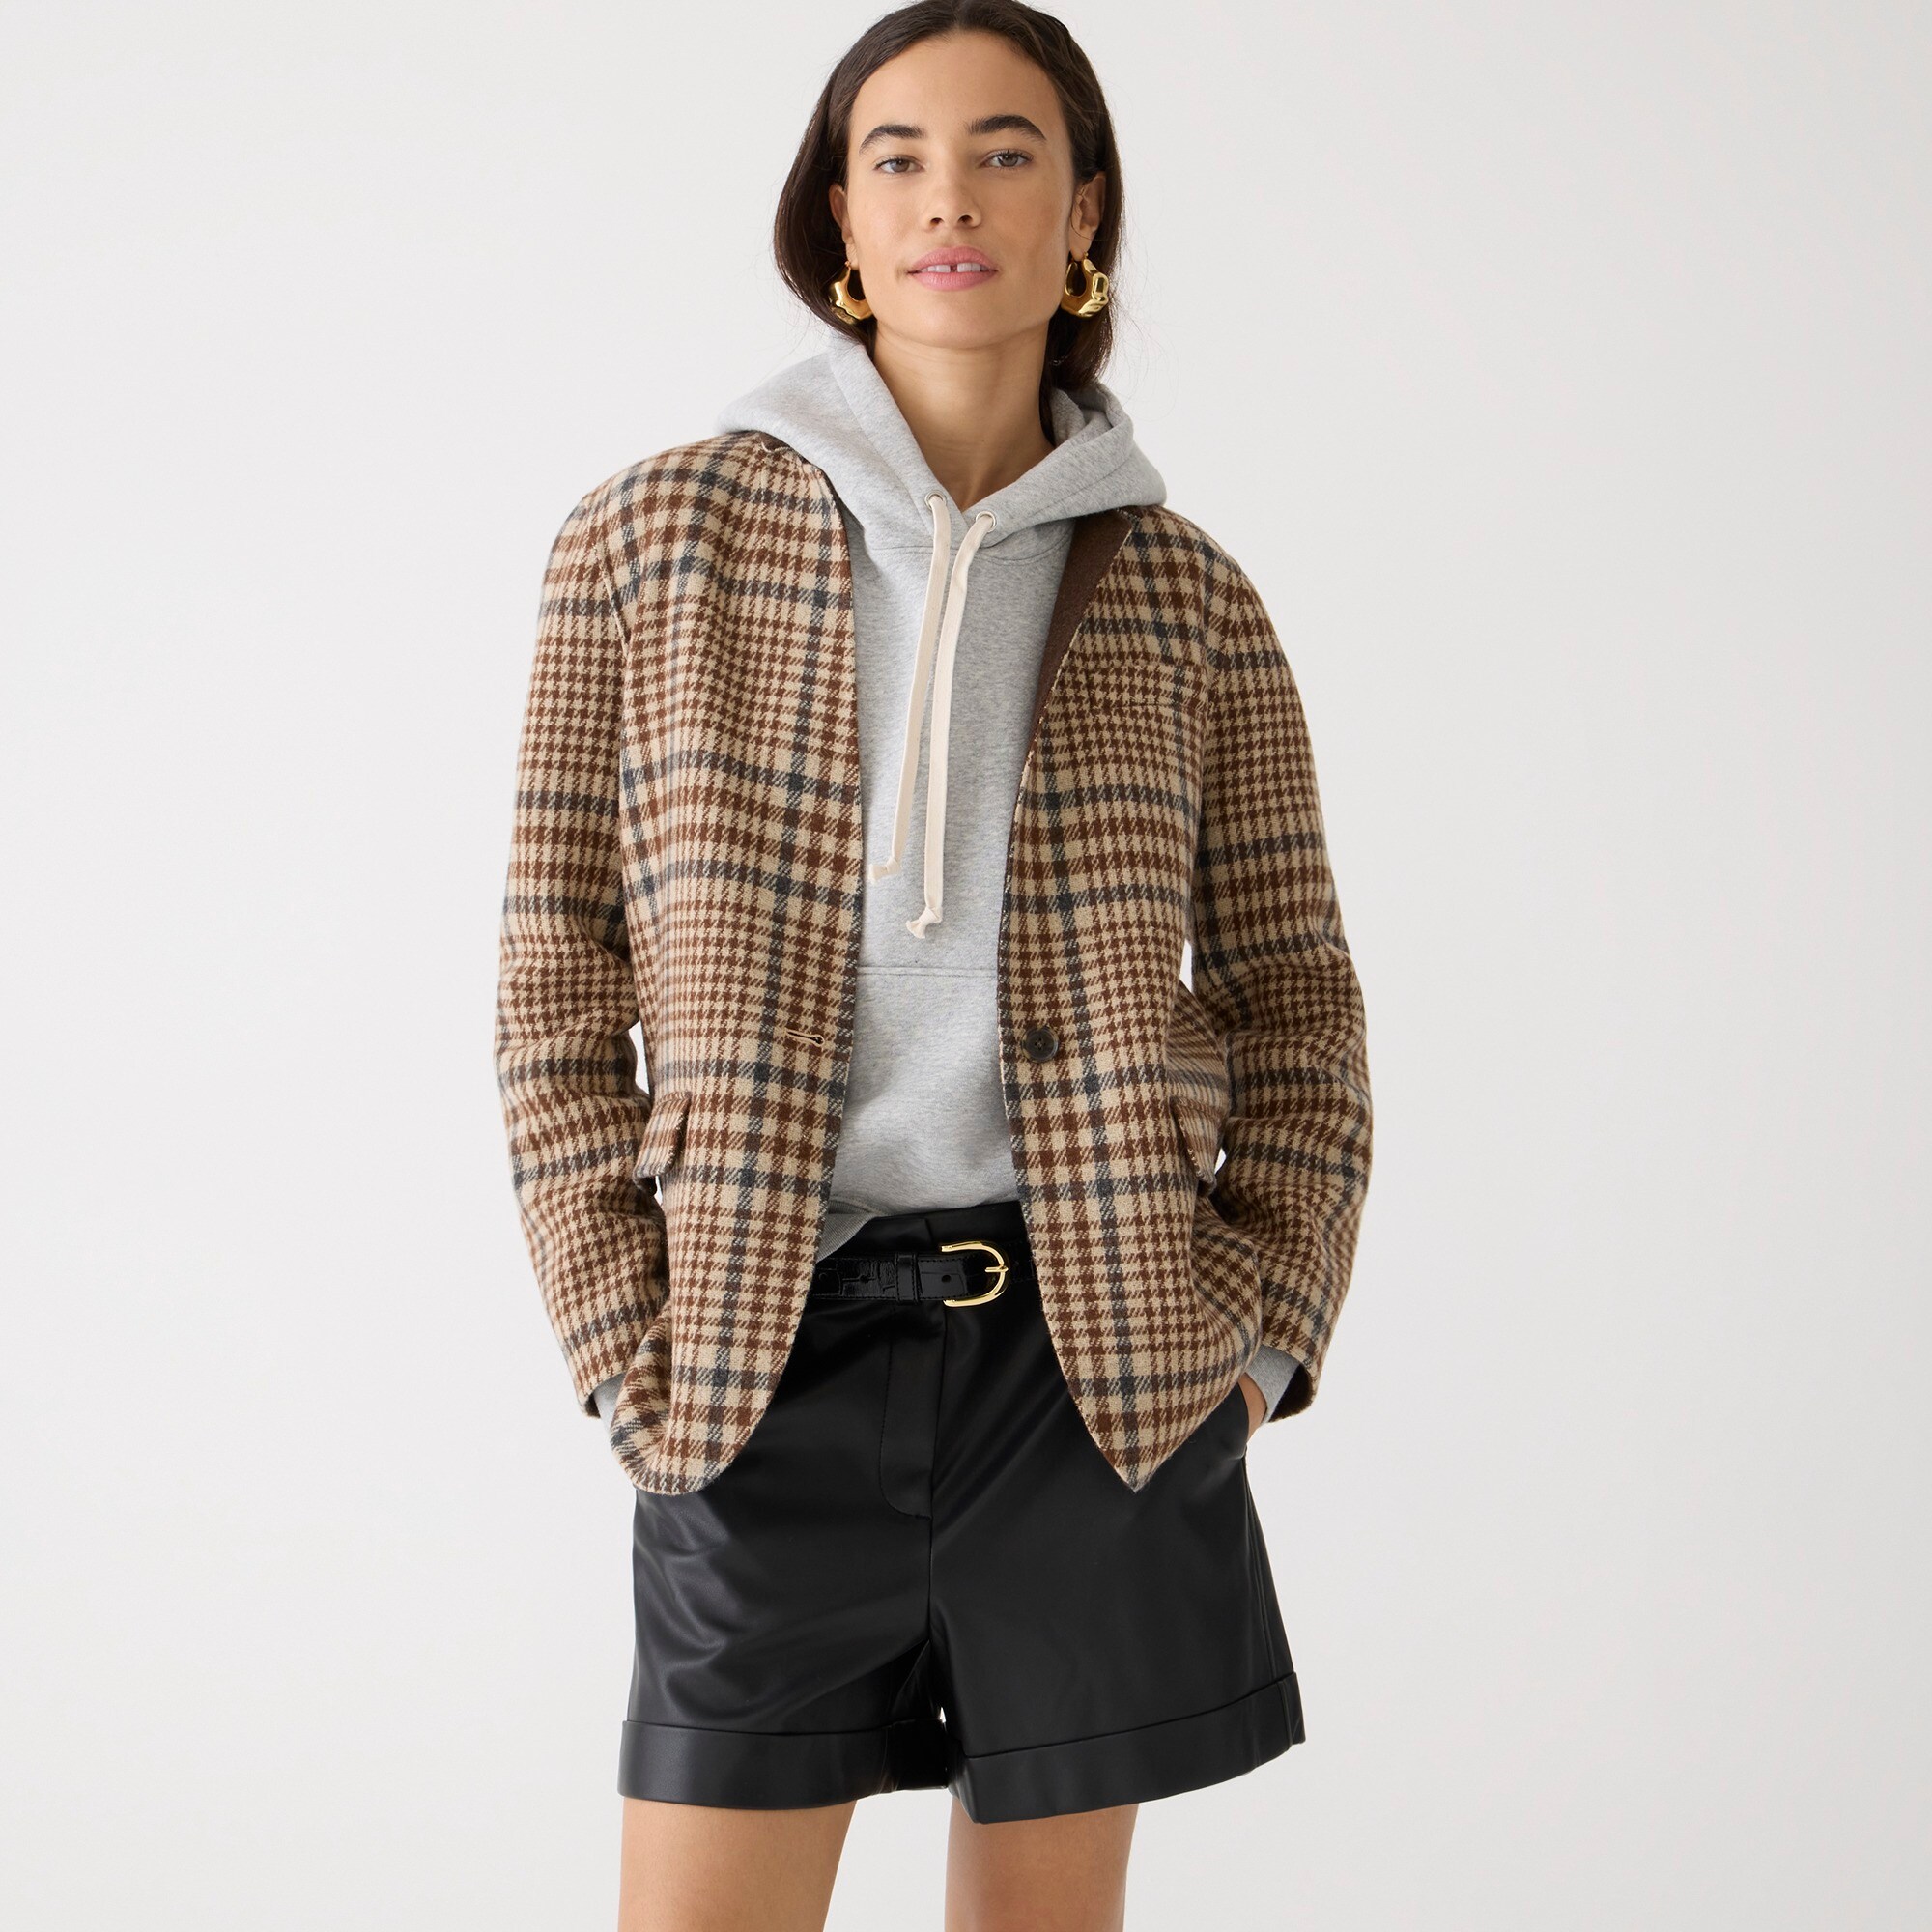 womens Leighton blazer-jacket in plaid double-faced wool blend